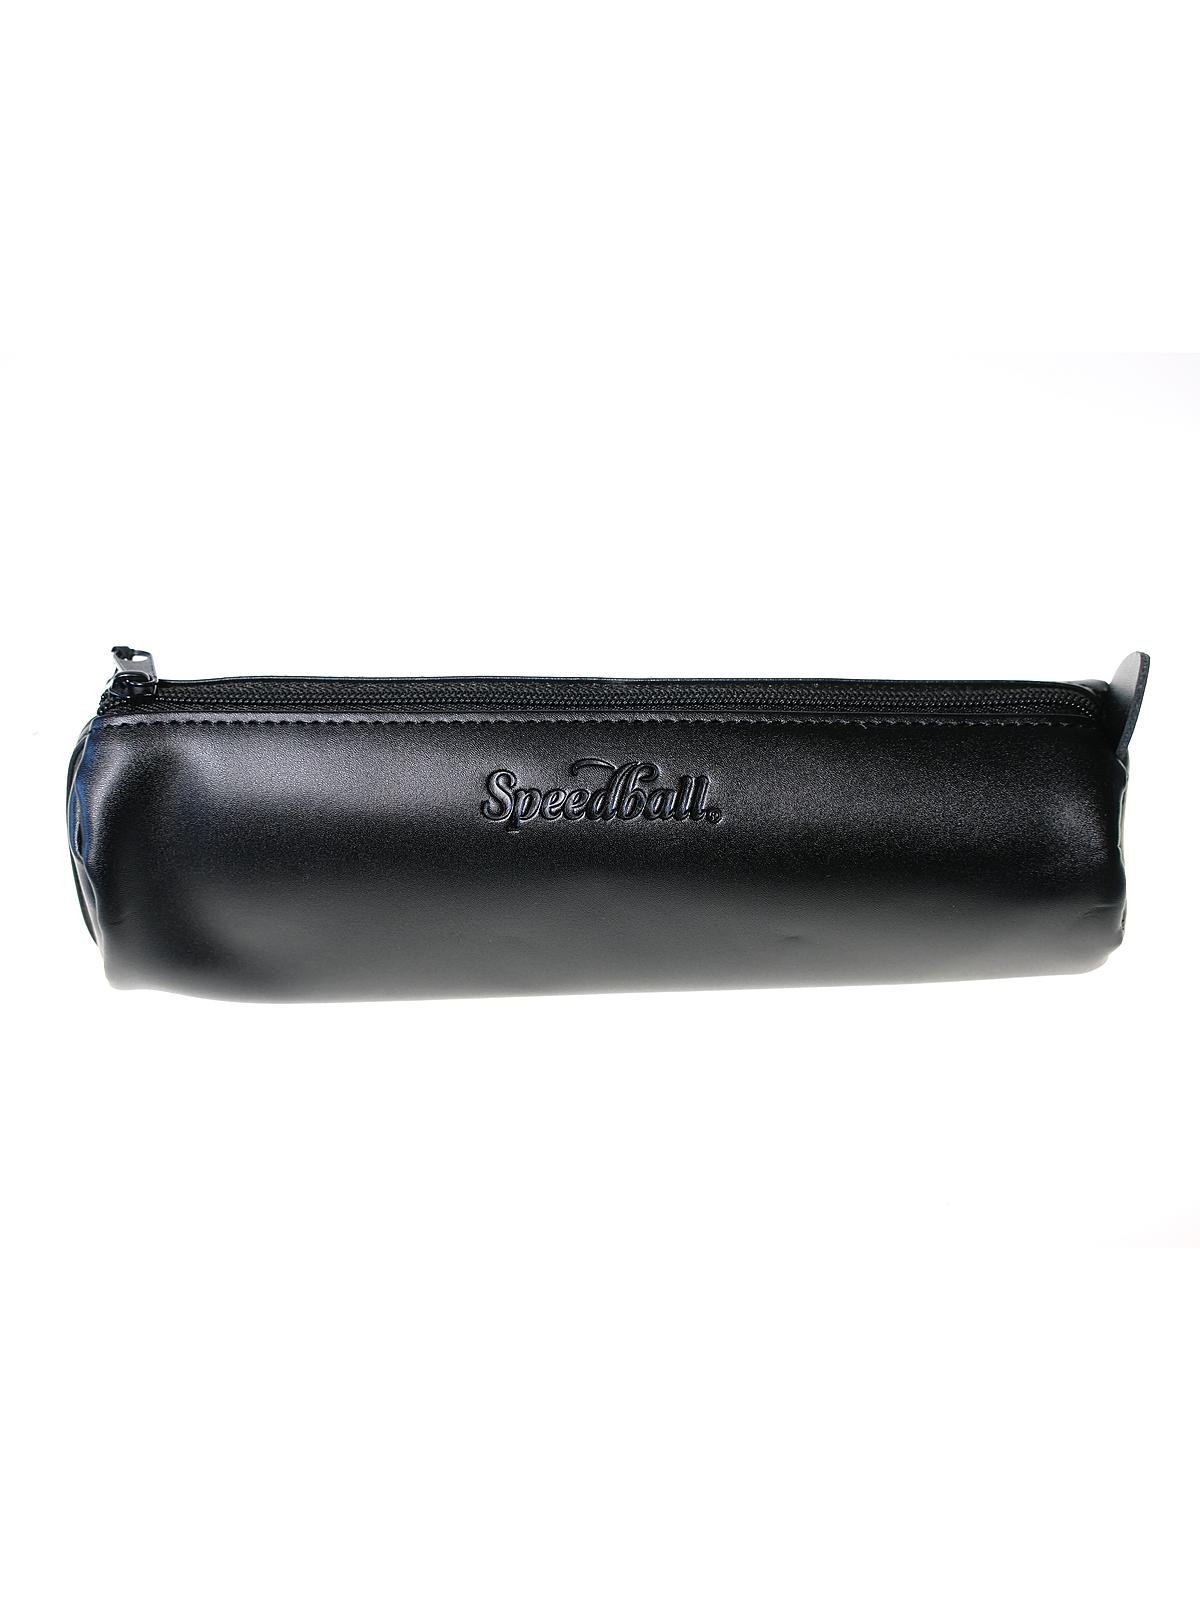 Global Art - Classic Leather Pencil Cases